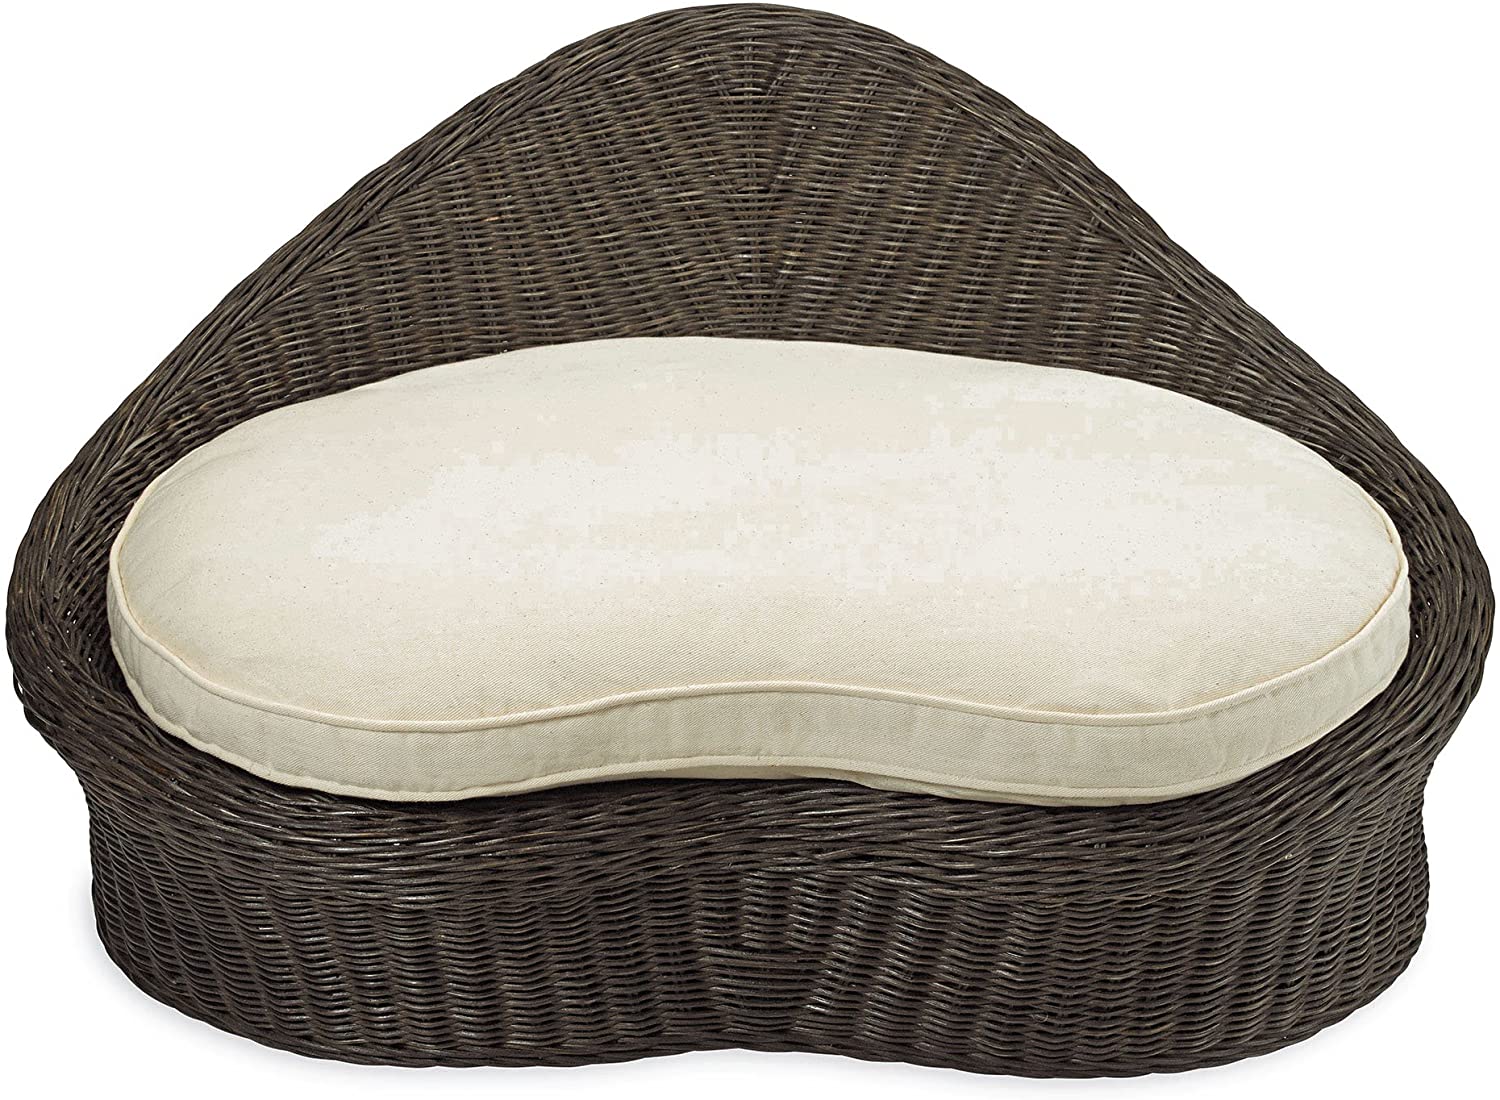 Gaiam Rattan Meditation Chair with Thick Natural Cotton Meditation Cushion Pillow